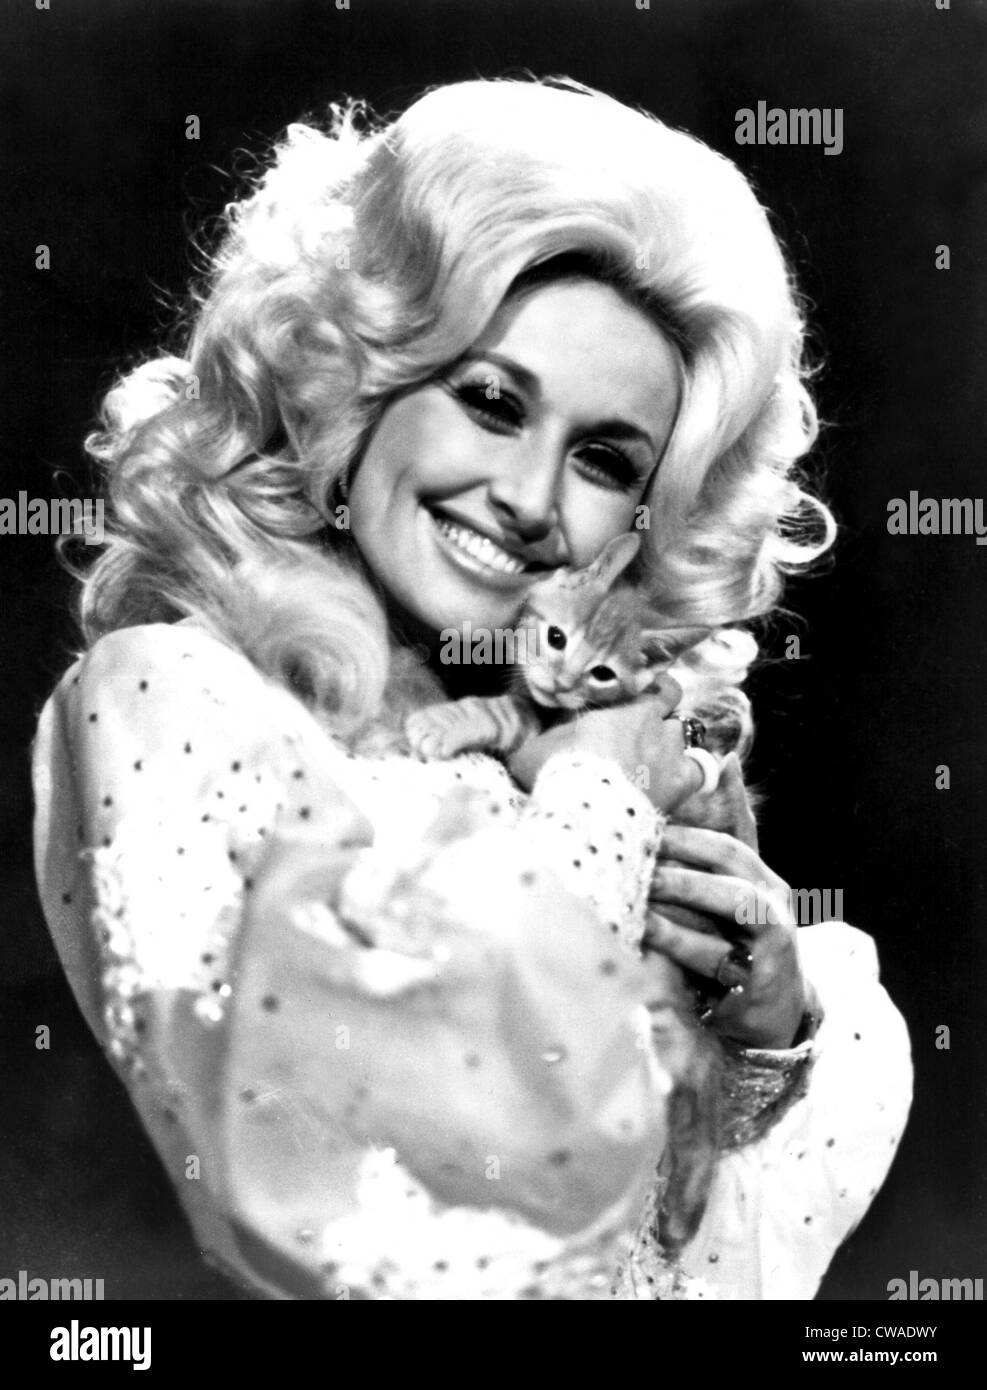 Dolly Parton and friend in the 1970s. Courtesy: CSU Archives / Everett Collection Stock Photo